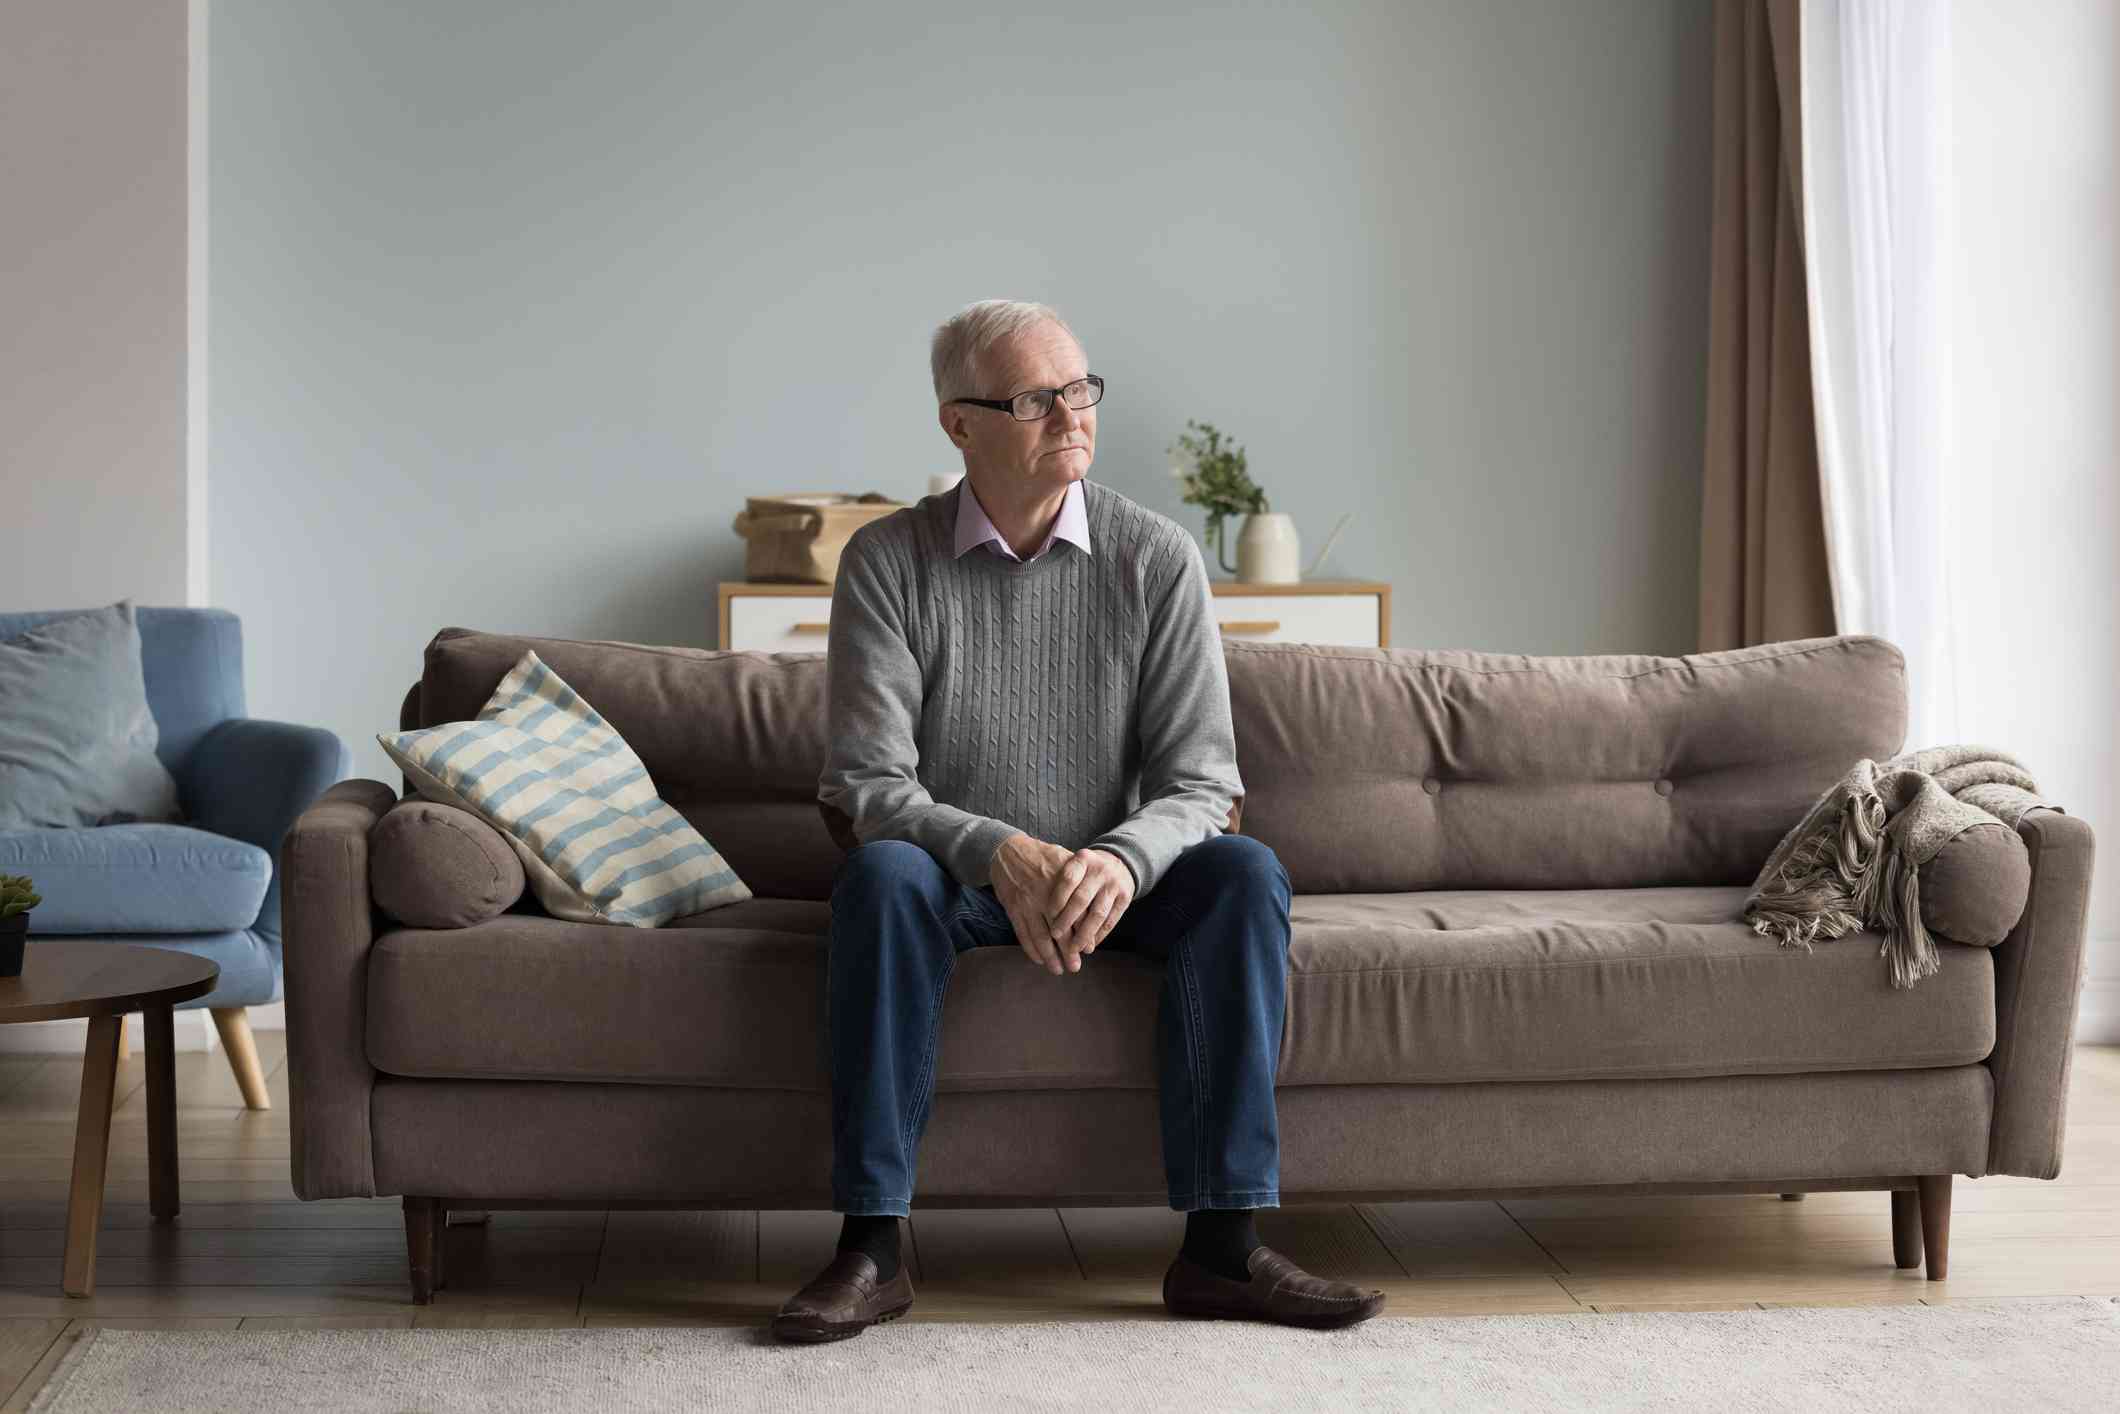 An elderly man in a grey sweater sits on the couch in his living room and gazes off with a sad expression.